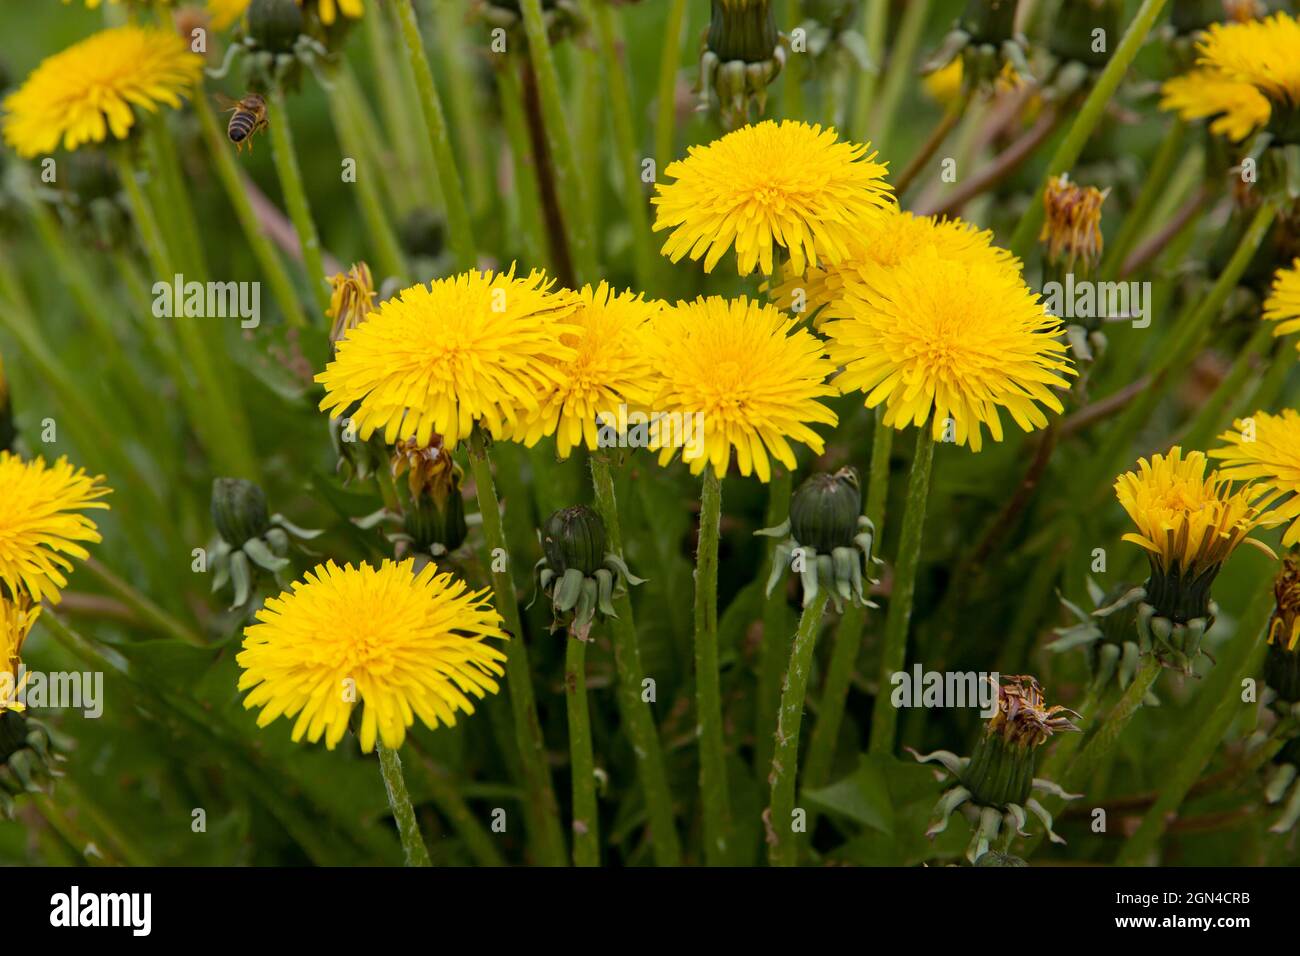 Yellow dandelion flowers with leaves in green grass, spring photo Stock Photo